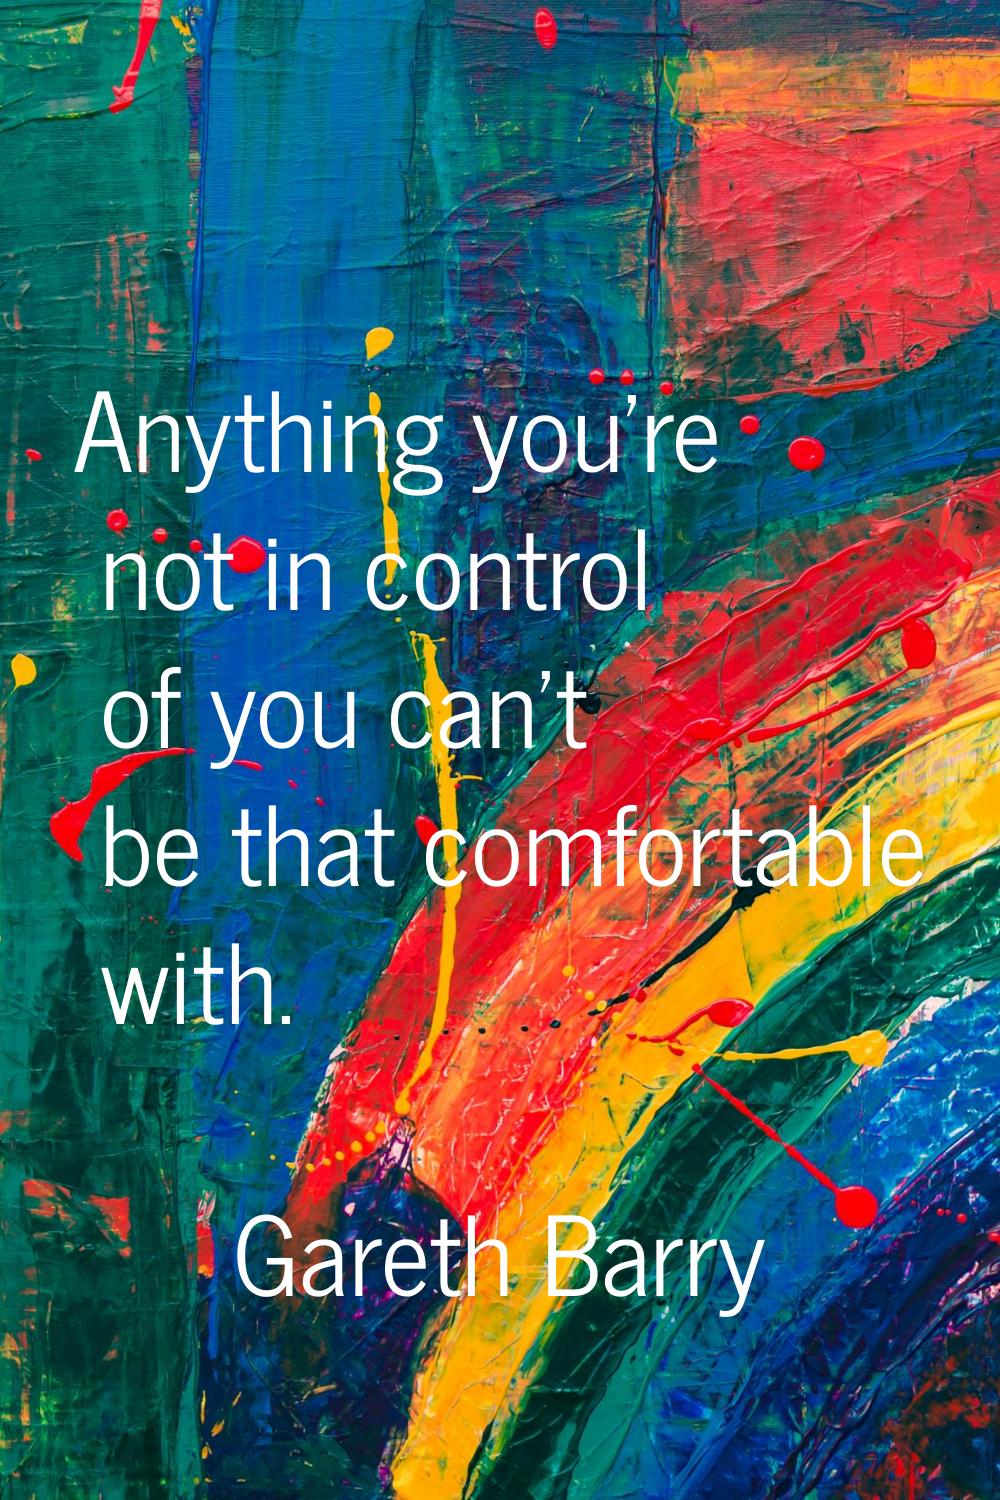 Anything you're not in control of you can't be that comfortable with.